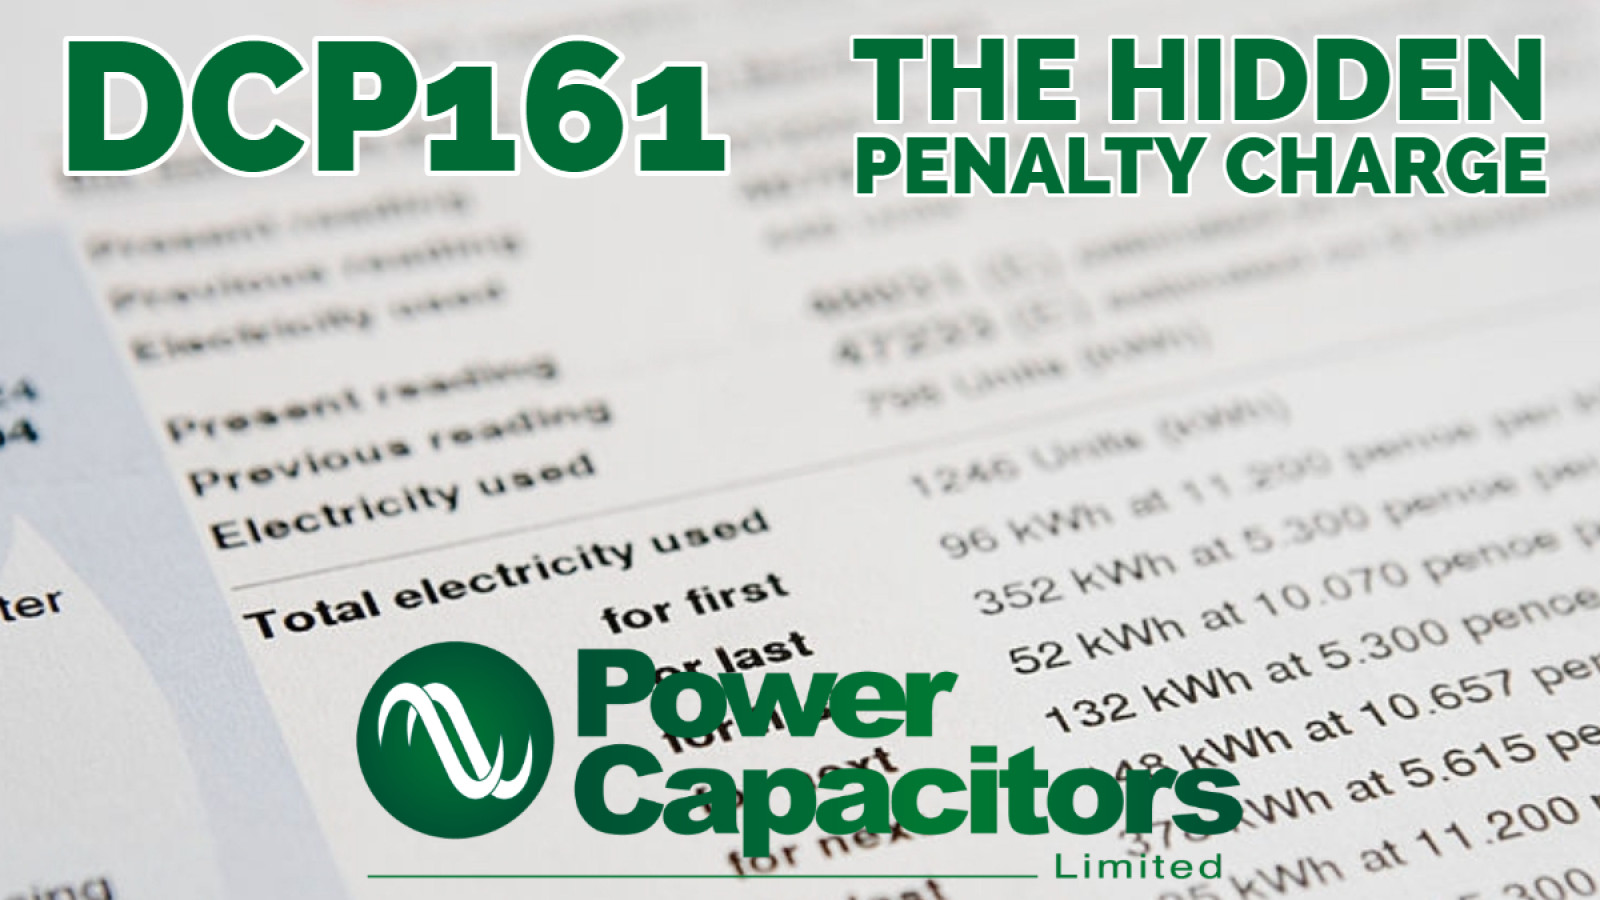 DCP161 - The Hidden Penalty Charge